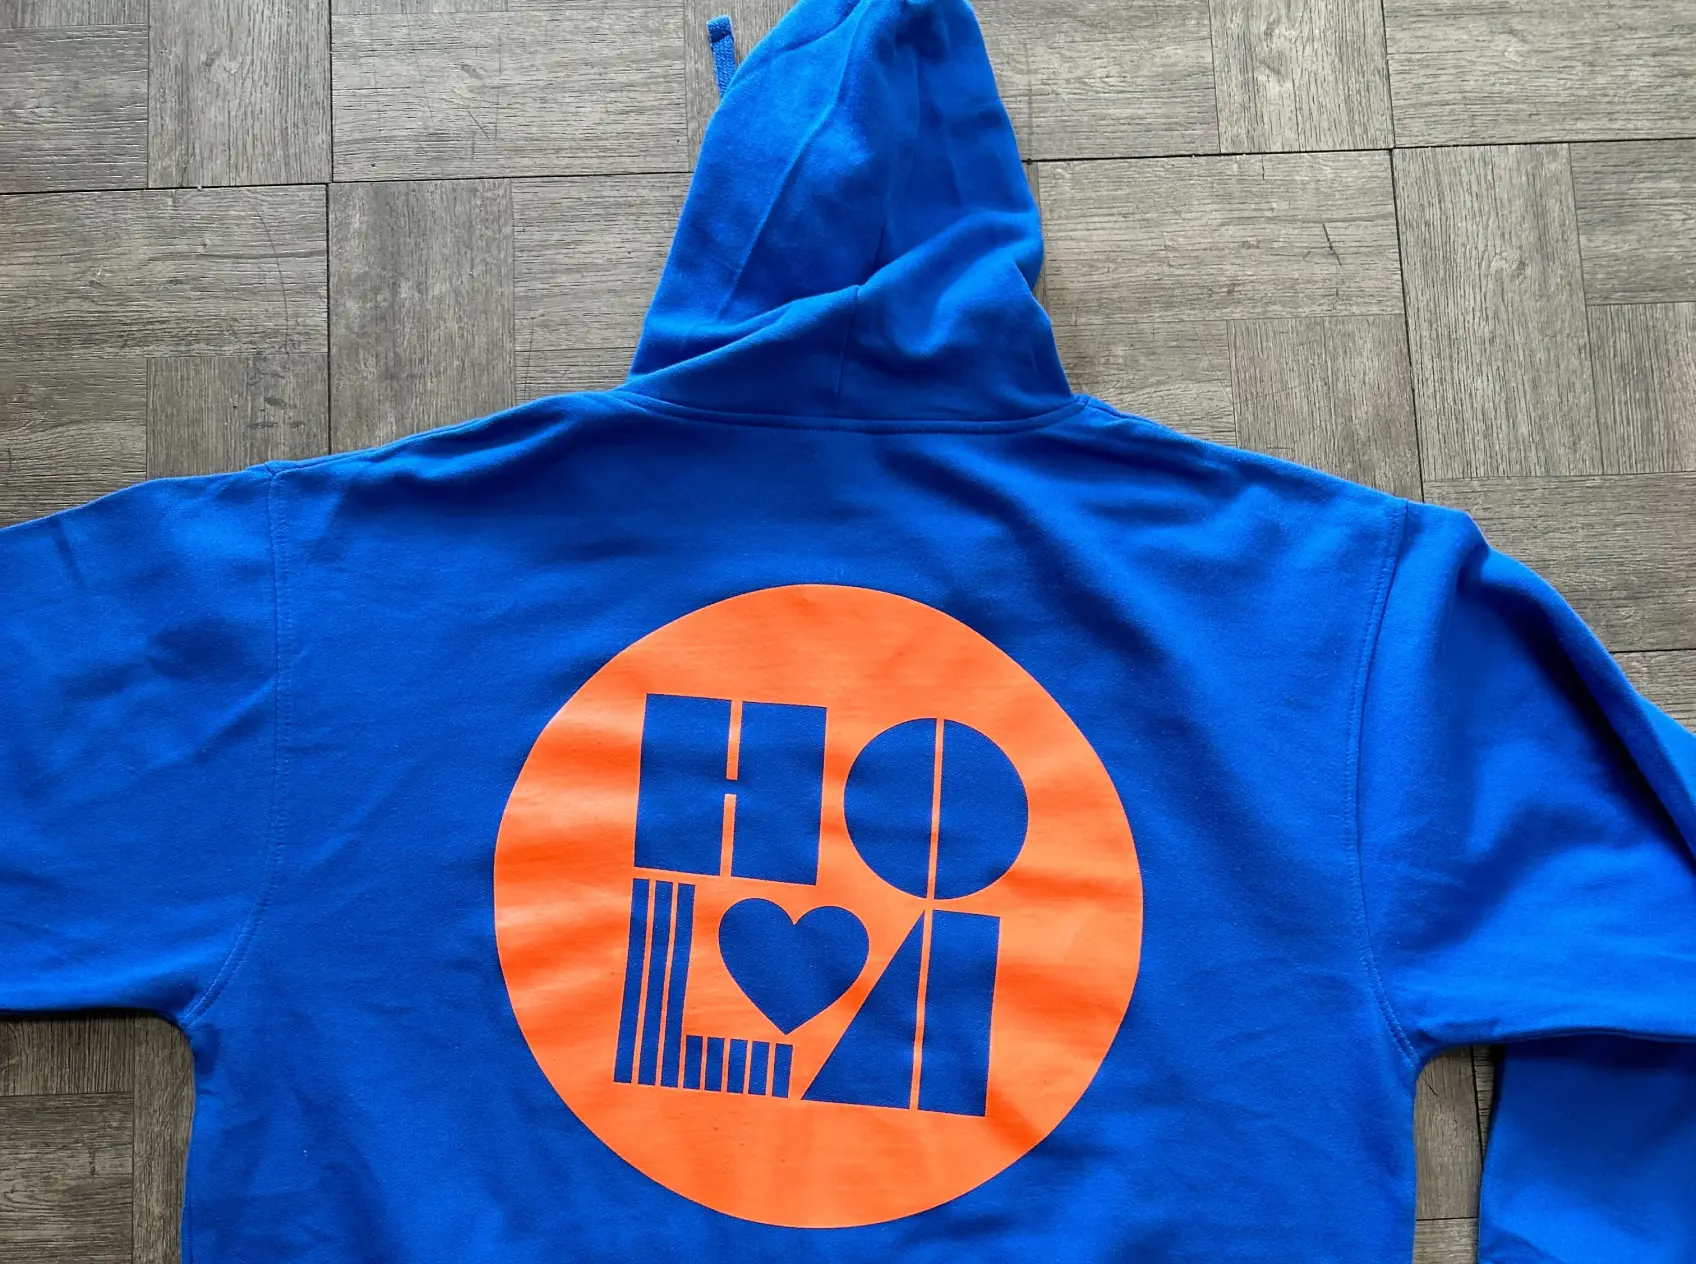 Blue hoodie with HOLA text